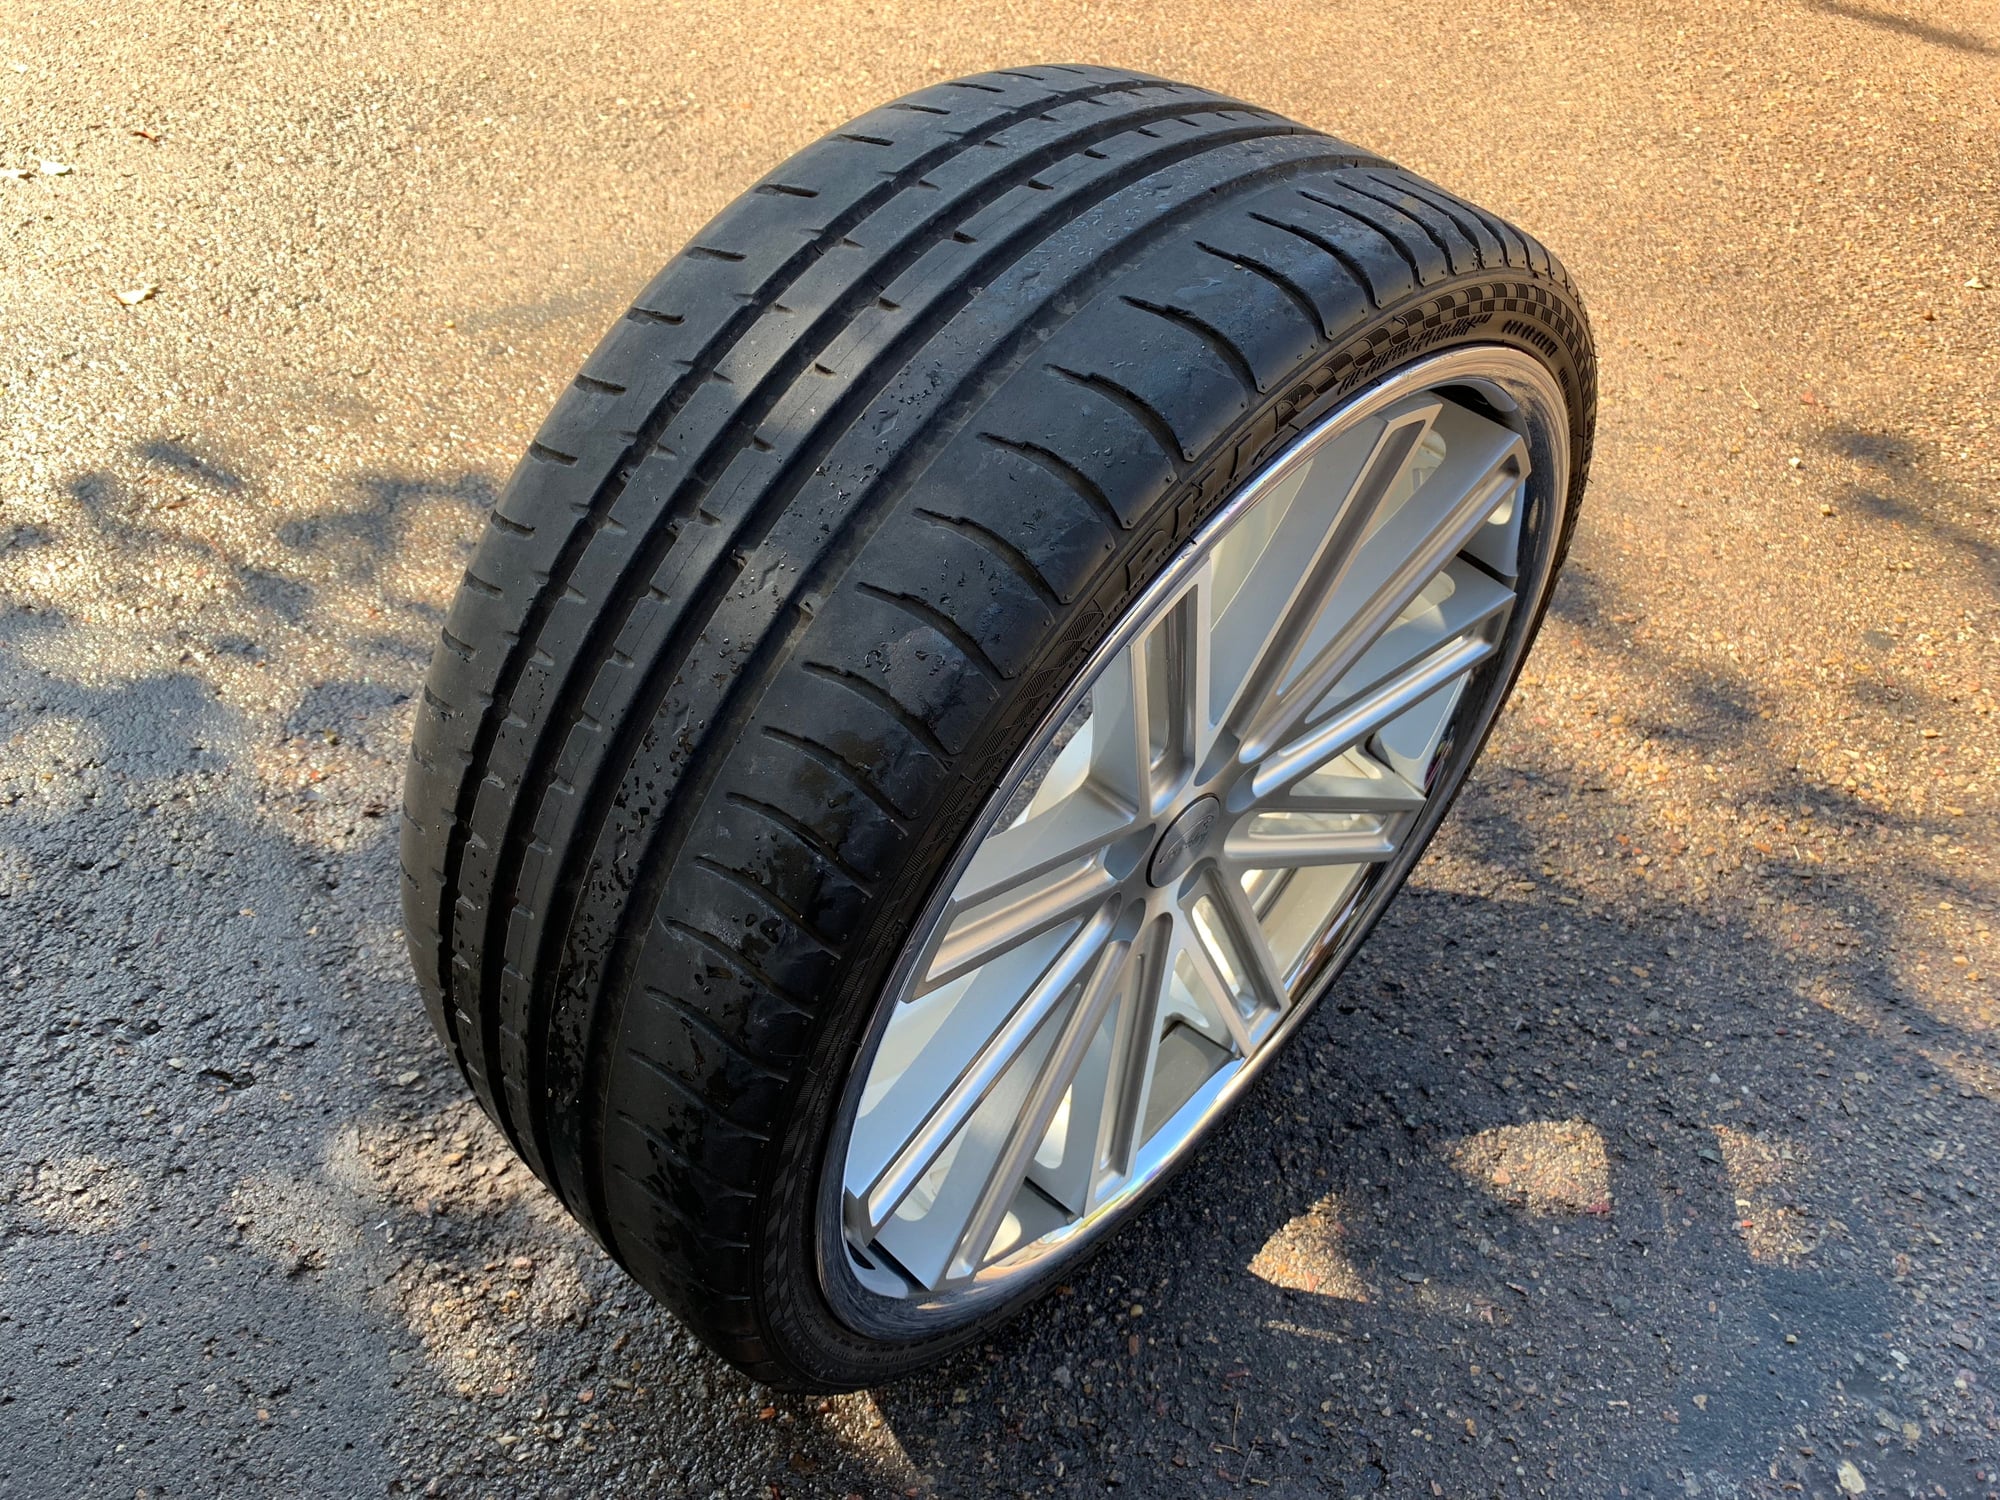 Wheels and Tires/Axles - 21" Coventry Warwick Wheels with Tires - Used - 2009 to 2019 Jaguar XF - San Diego, CA 92124, United States